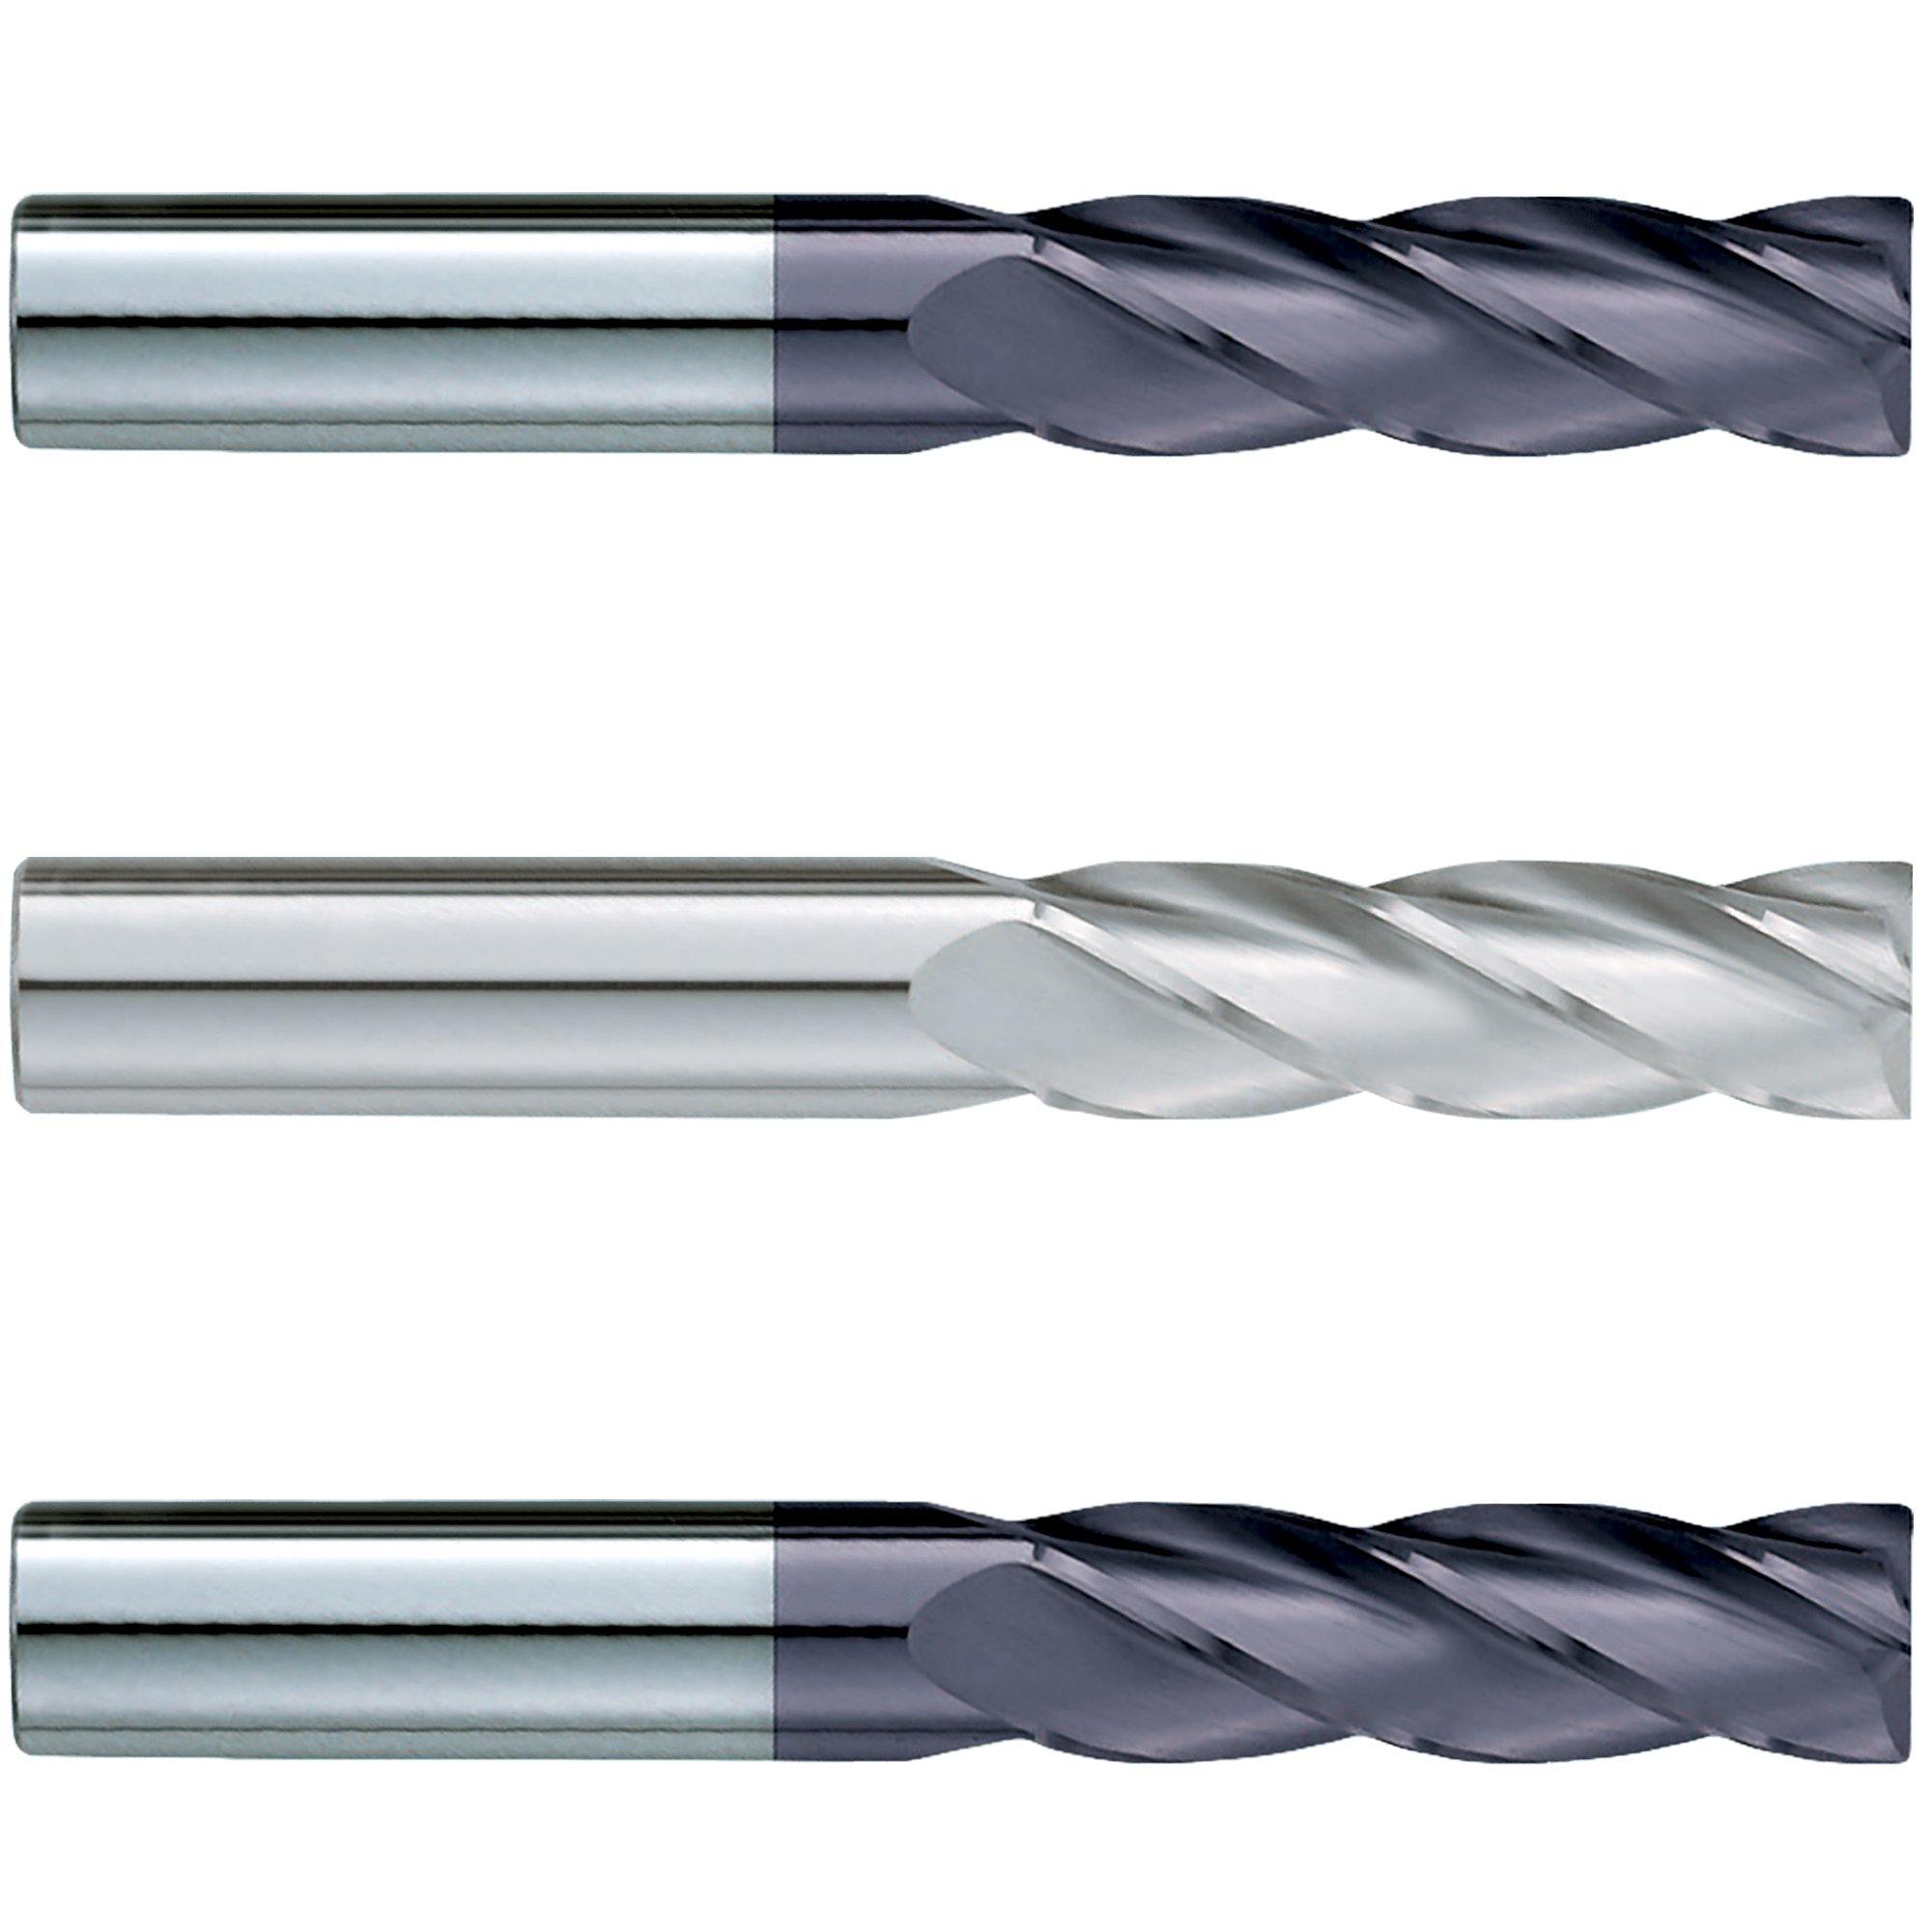 (3 Pack) 3/4" x 4" x 7" Extra Long Square Carbide End Mill - The End Mill Store 